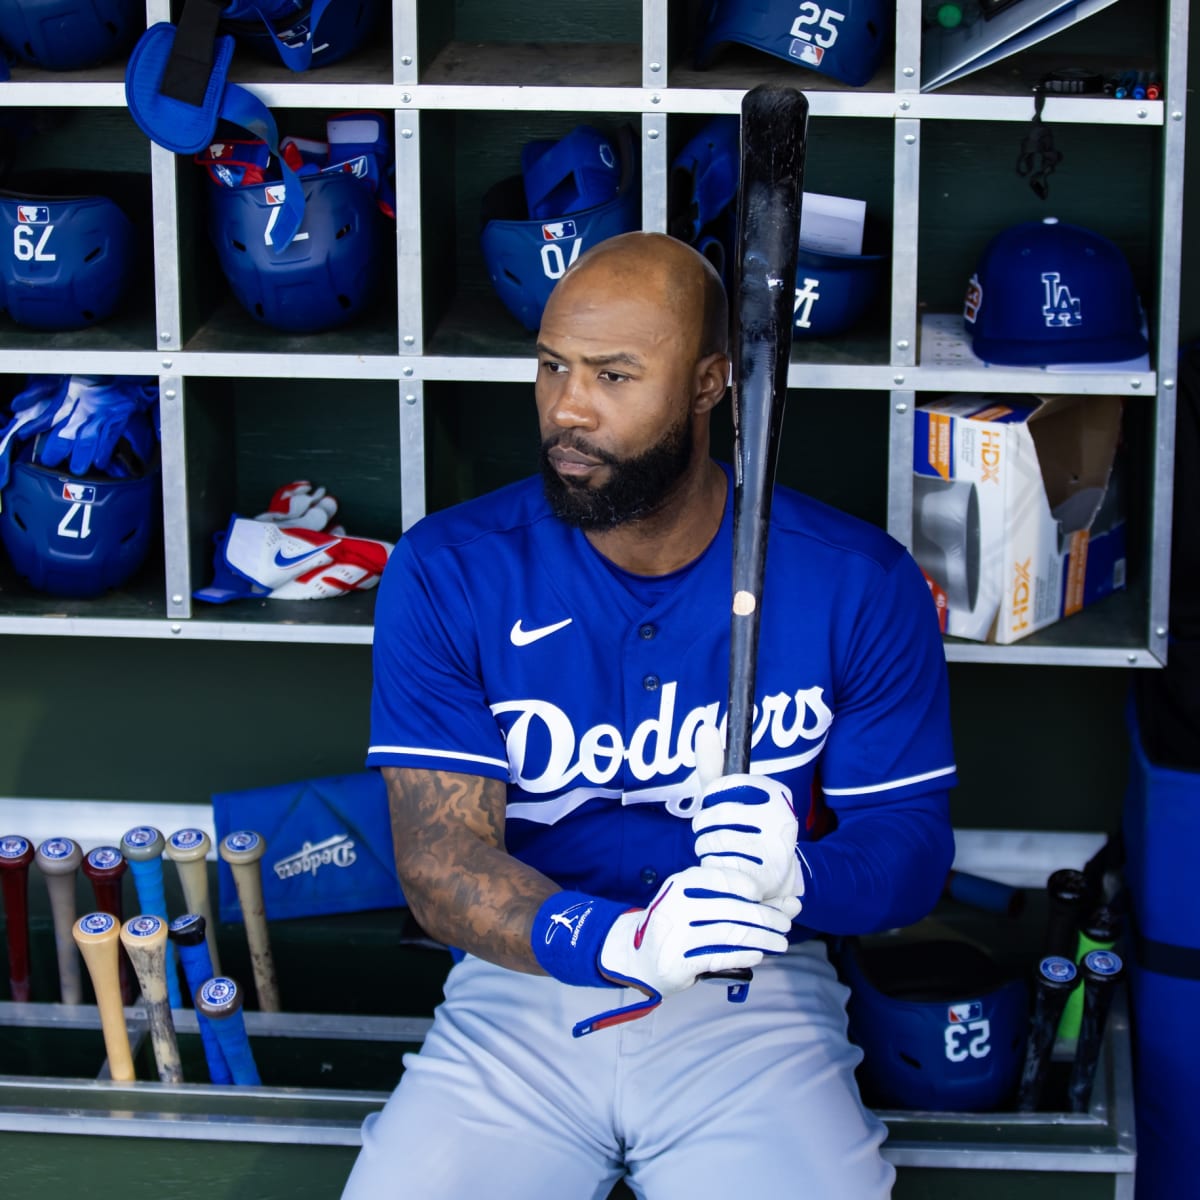 Dodgers News: Dave Roberts Expects Jason Heyward to Make Opening Day Roster  - Inside the Dodgers